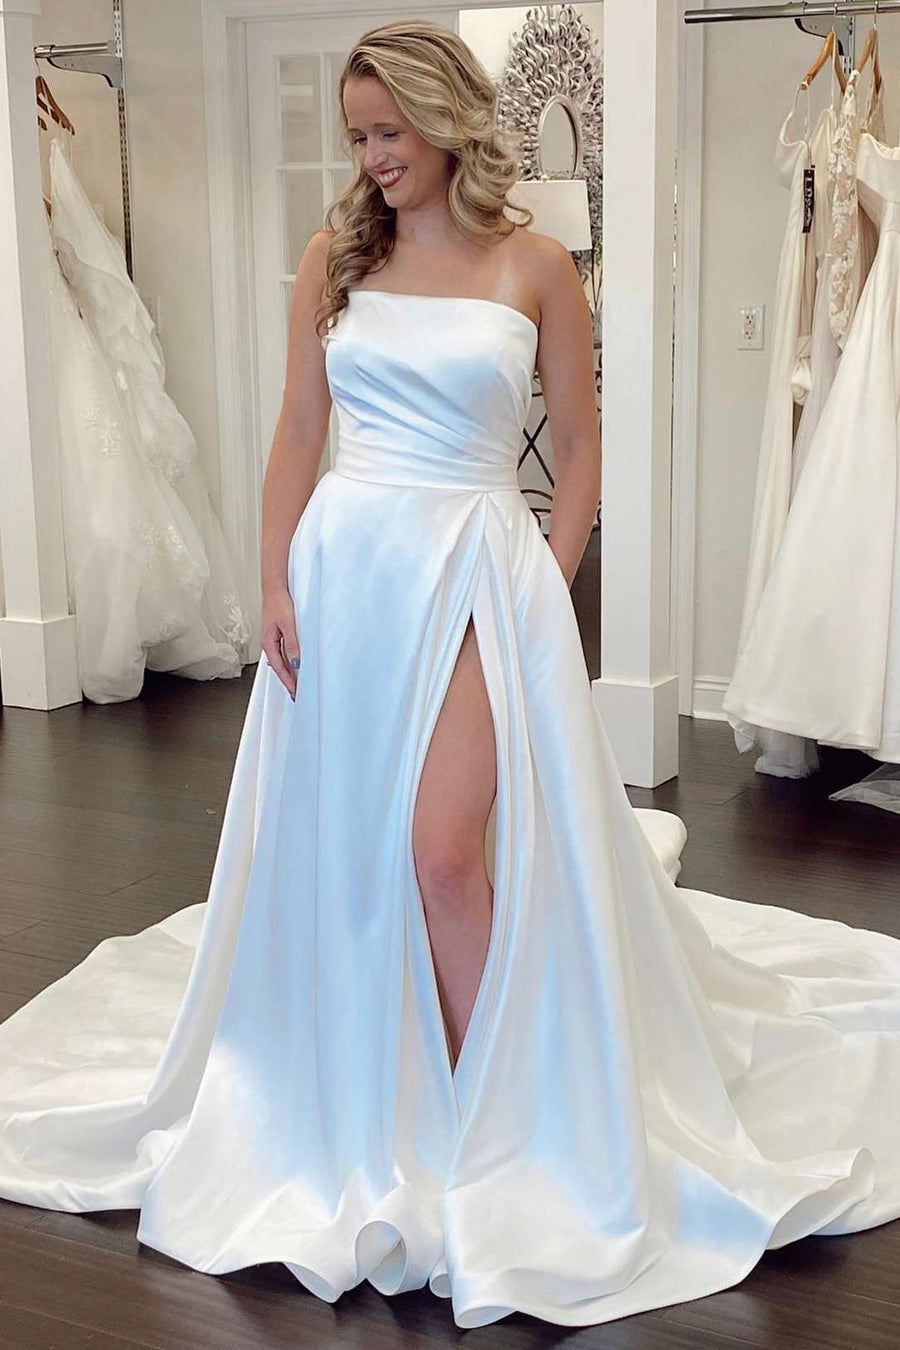 White Satin Strapless A-Line Bridal Gown with Slit